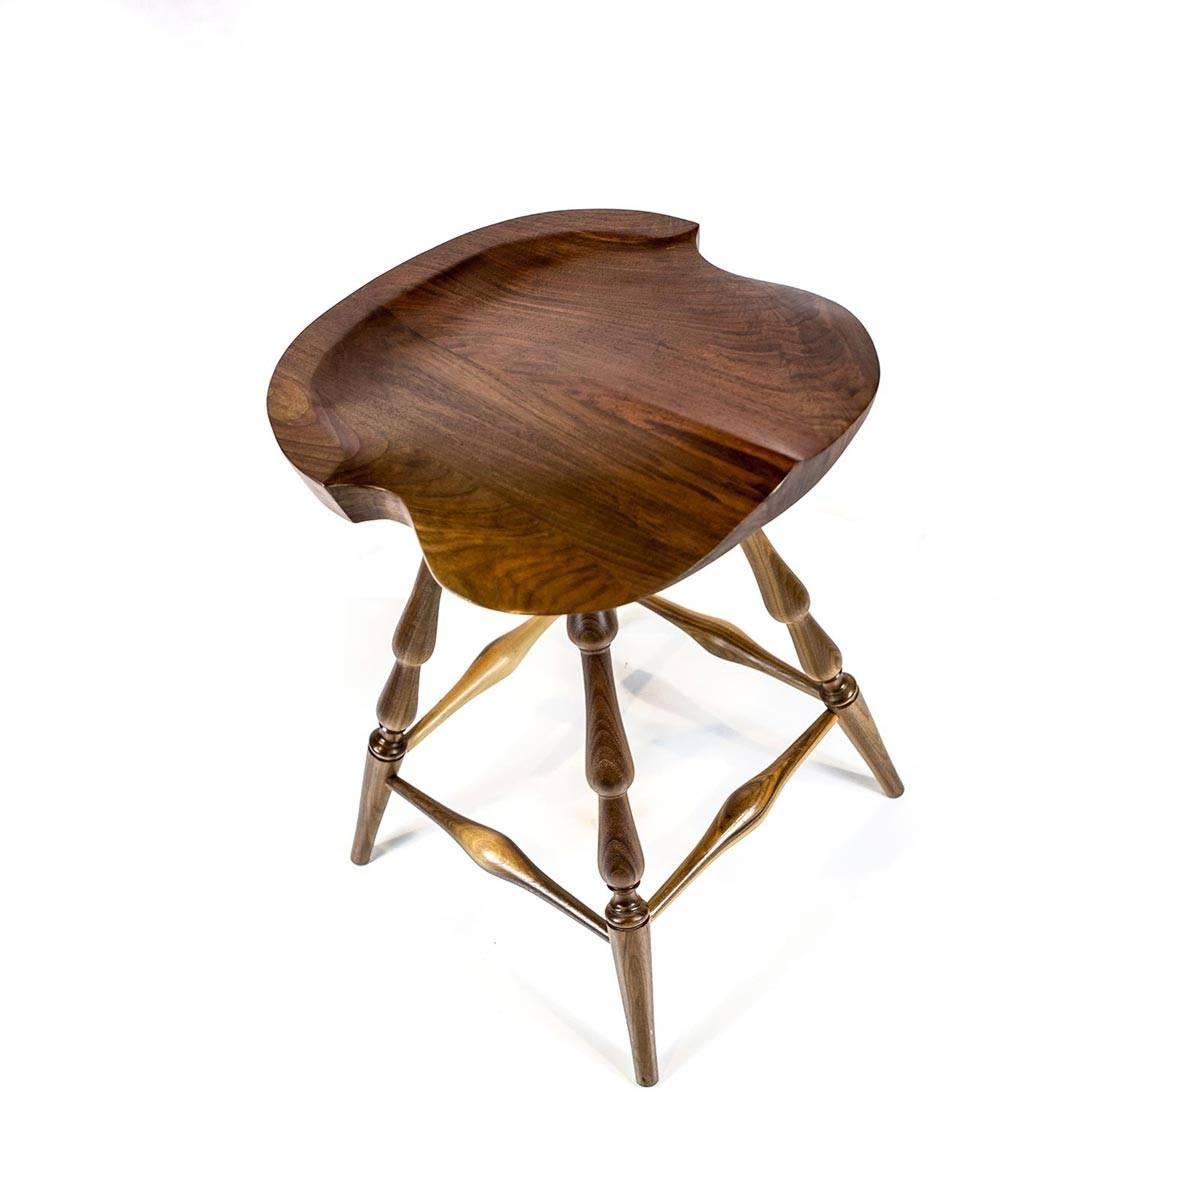 The Brubaker stool is a swivel barstool inspired by our windsor chairs and antique tractor seats. Built from solid black walnut, the stool is about 25" tall, and seat is 17.5 inches.

Designed by our sister brand Shimna. Additional discounts